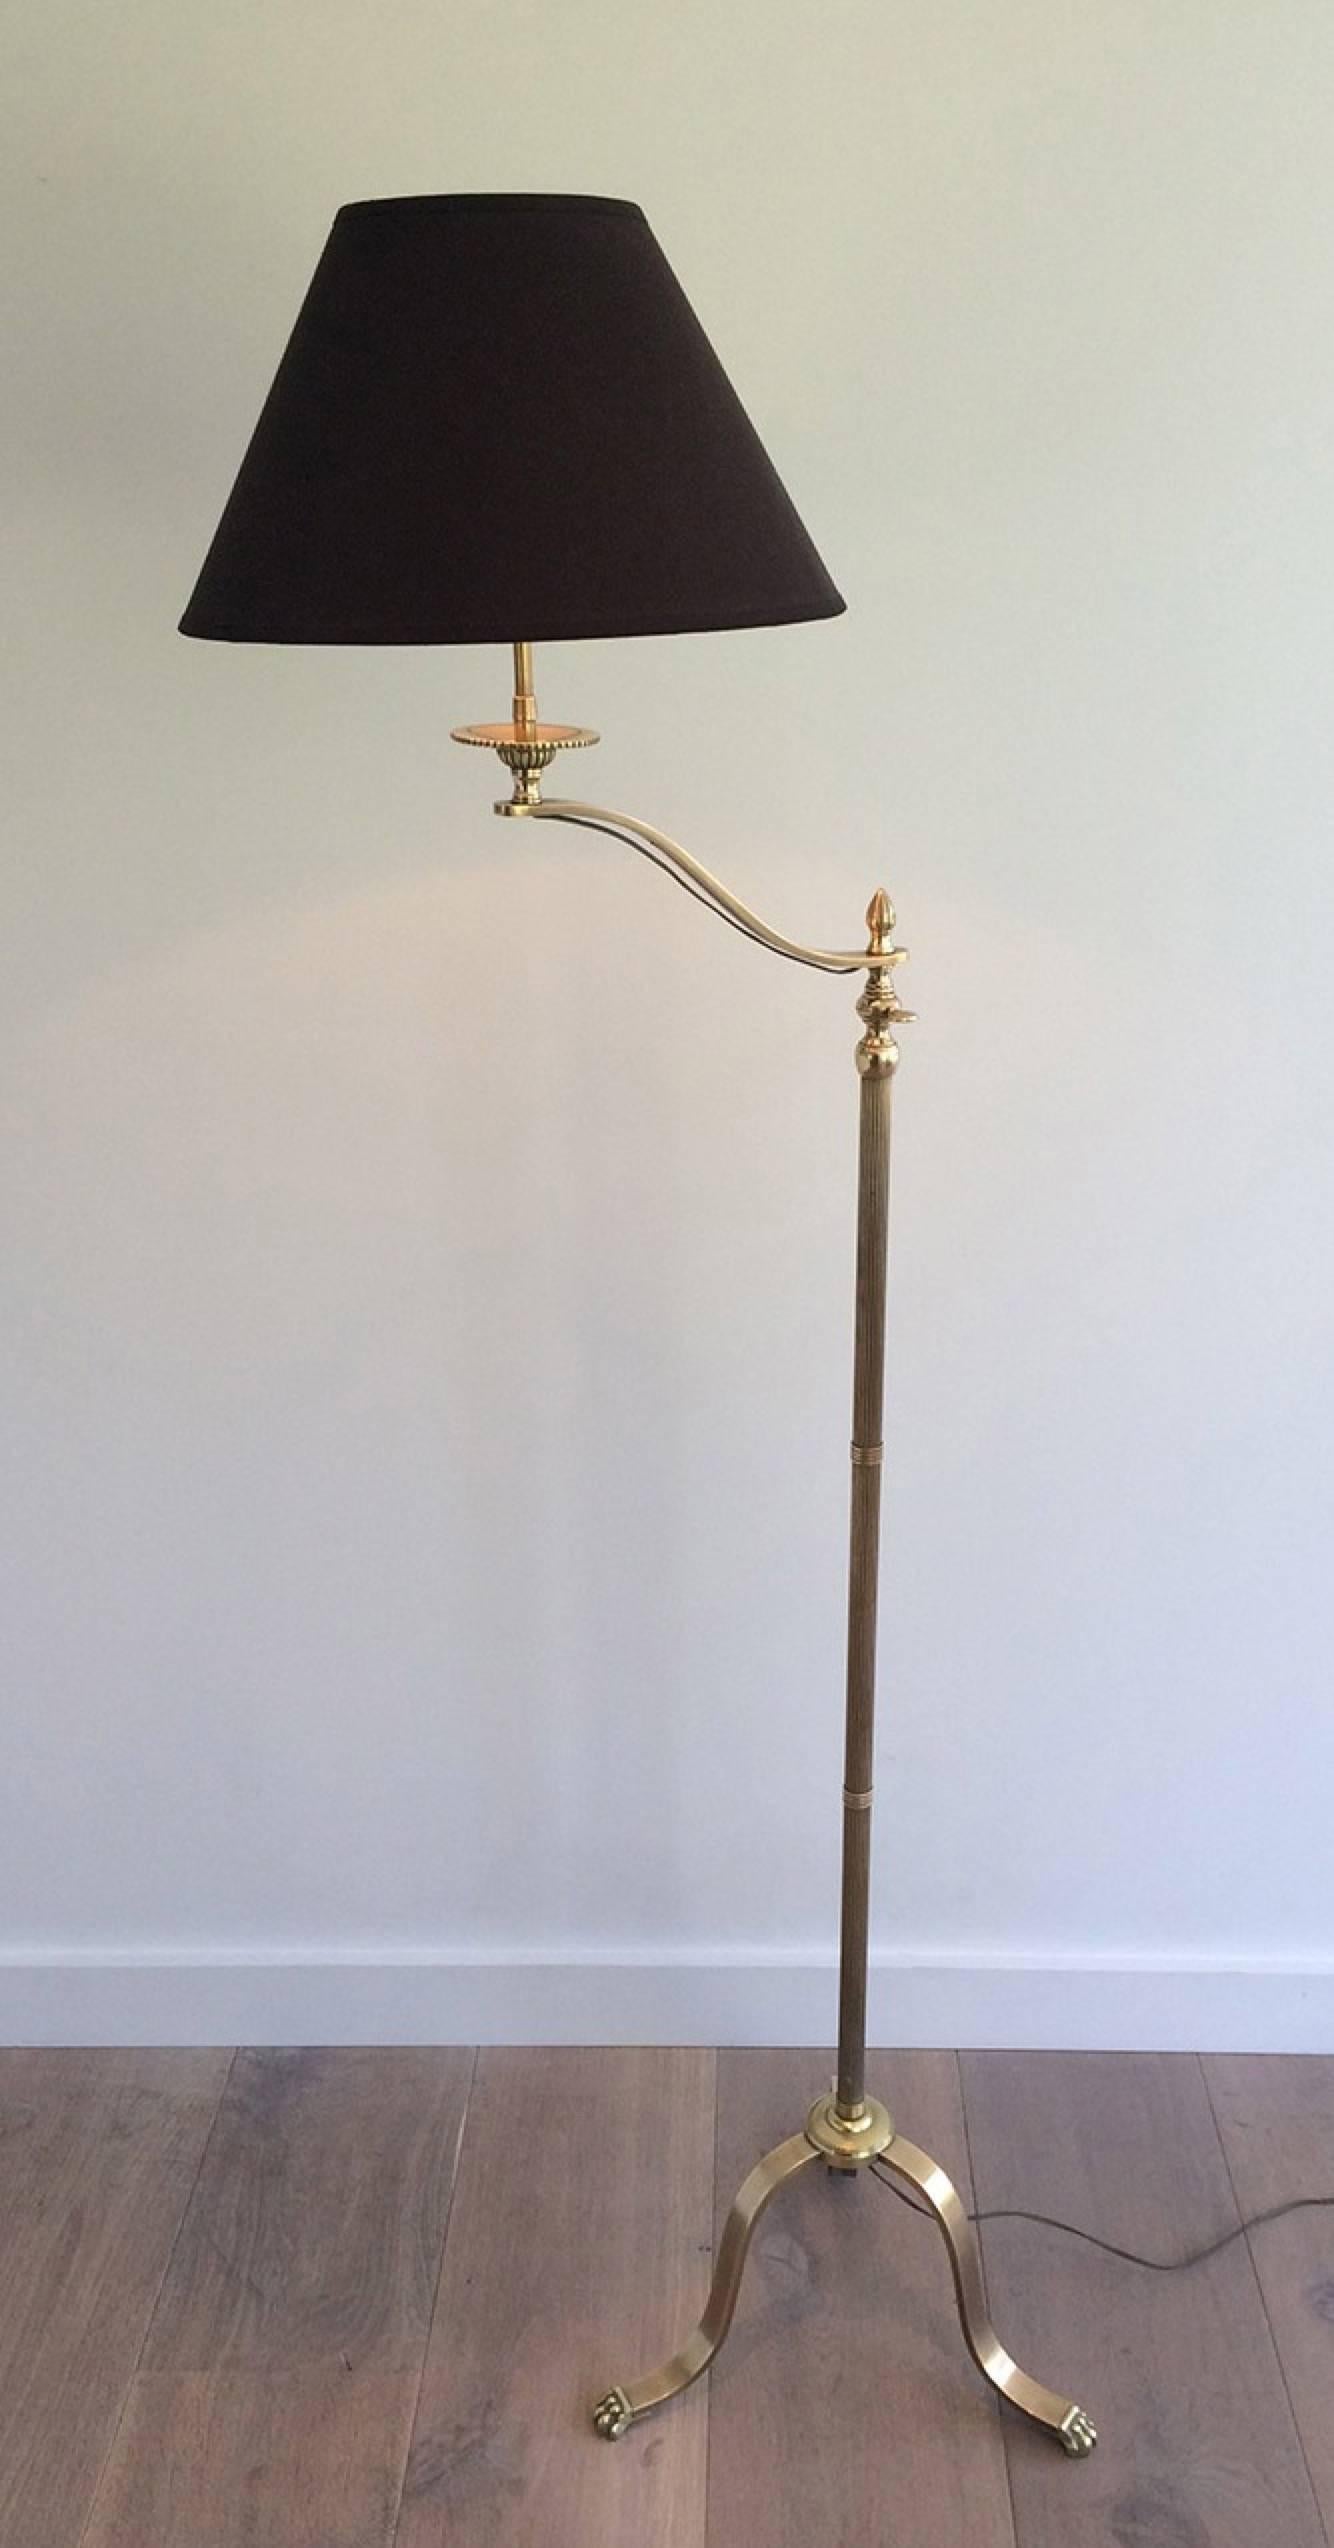 Pair of French neoclassical adjustable and swinging brass reading floor lamps with clawfeet by Maison Jansen.

This item is currently in France, please allow 2 to 4 weeks delivery to New York. Shipping costs from France to our warehouse in New